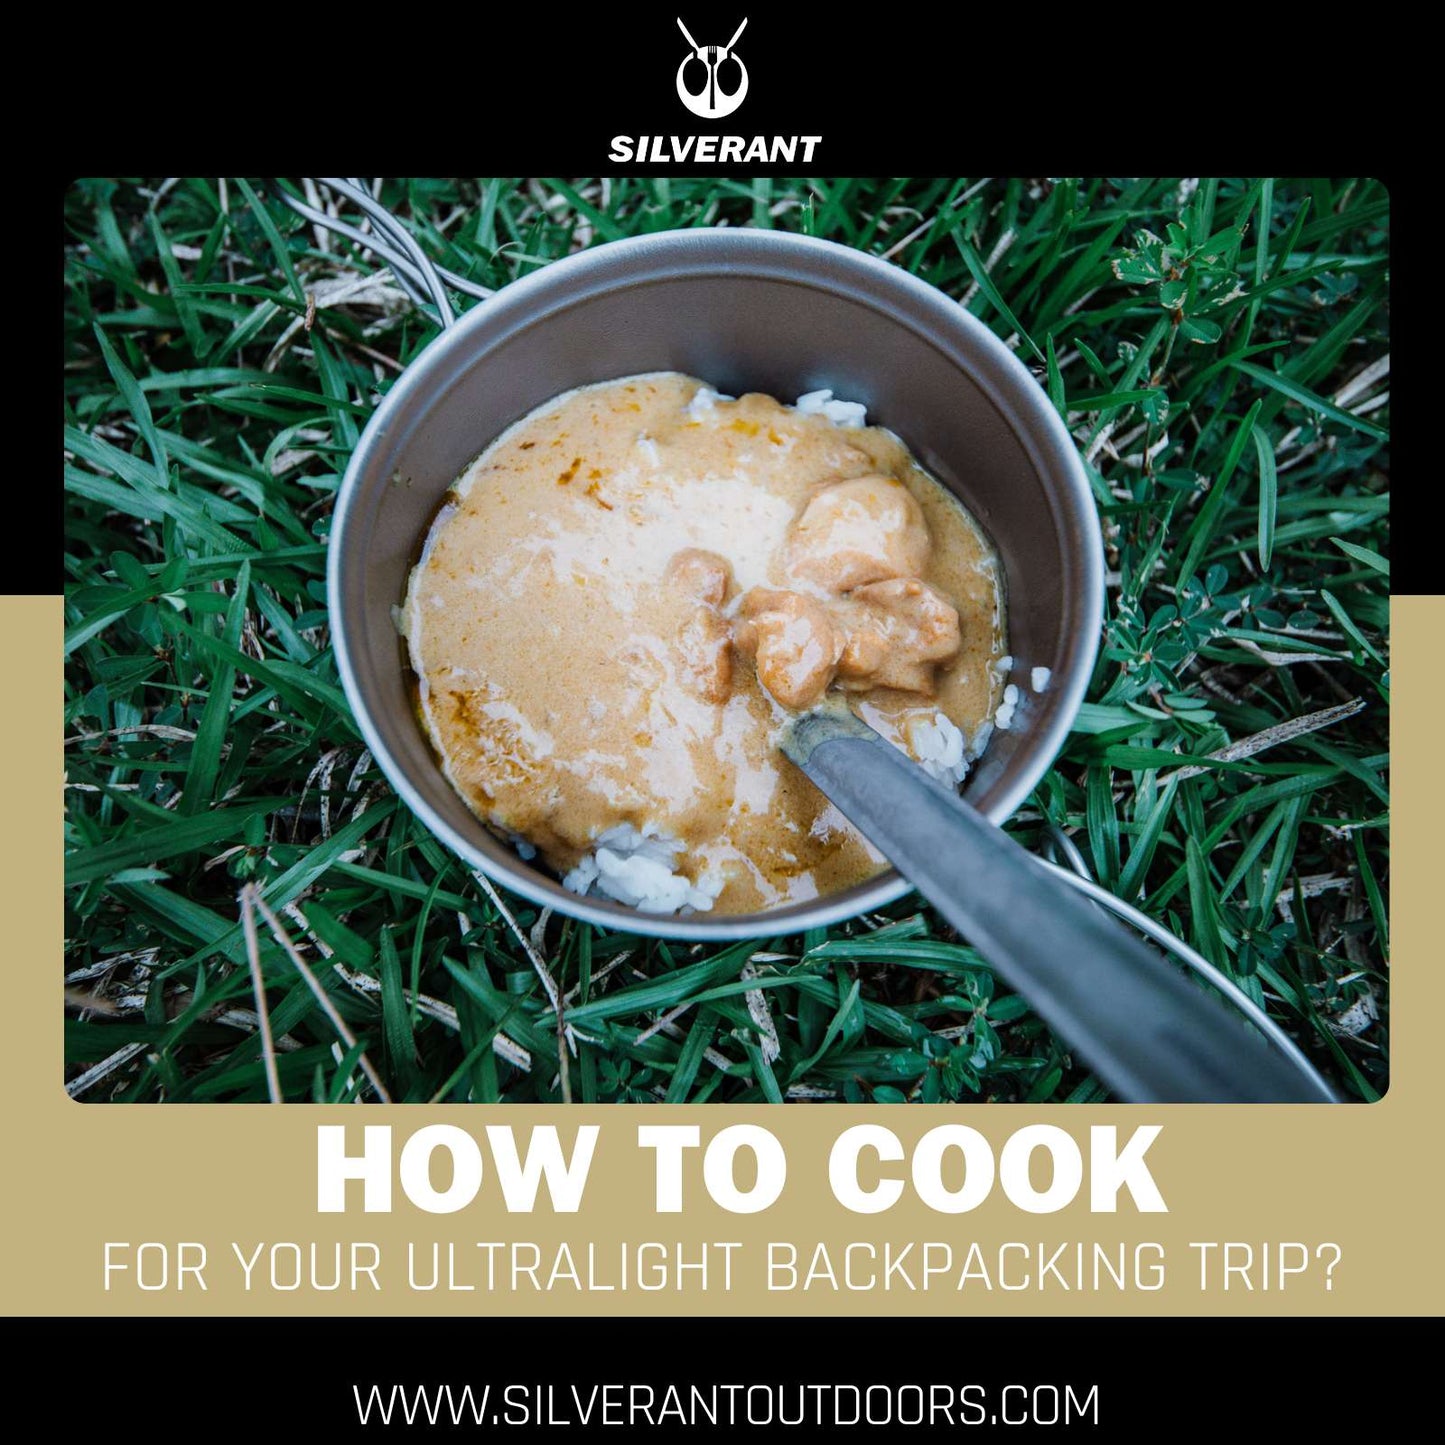 How to Cook for Your Ultralight Backpacking Trip?